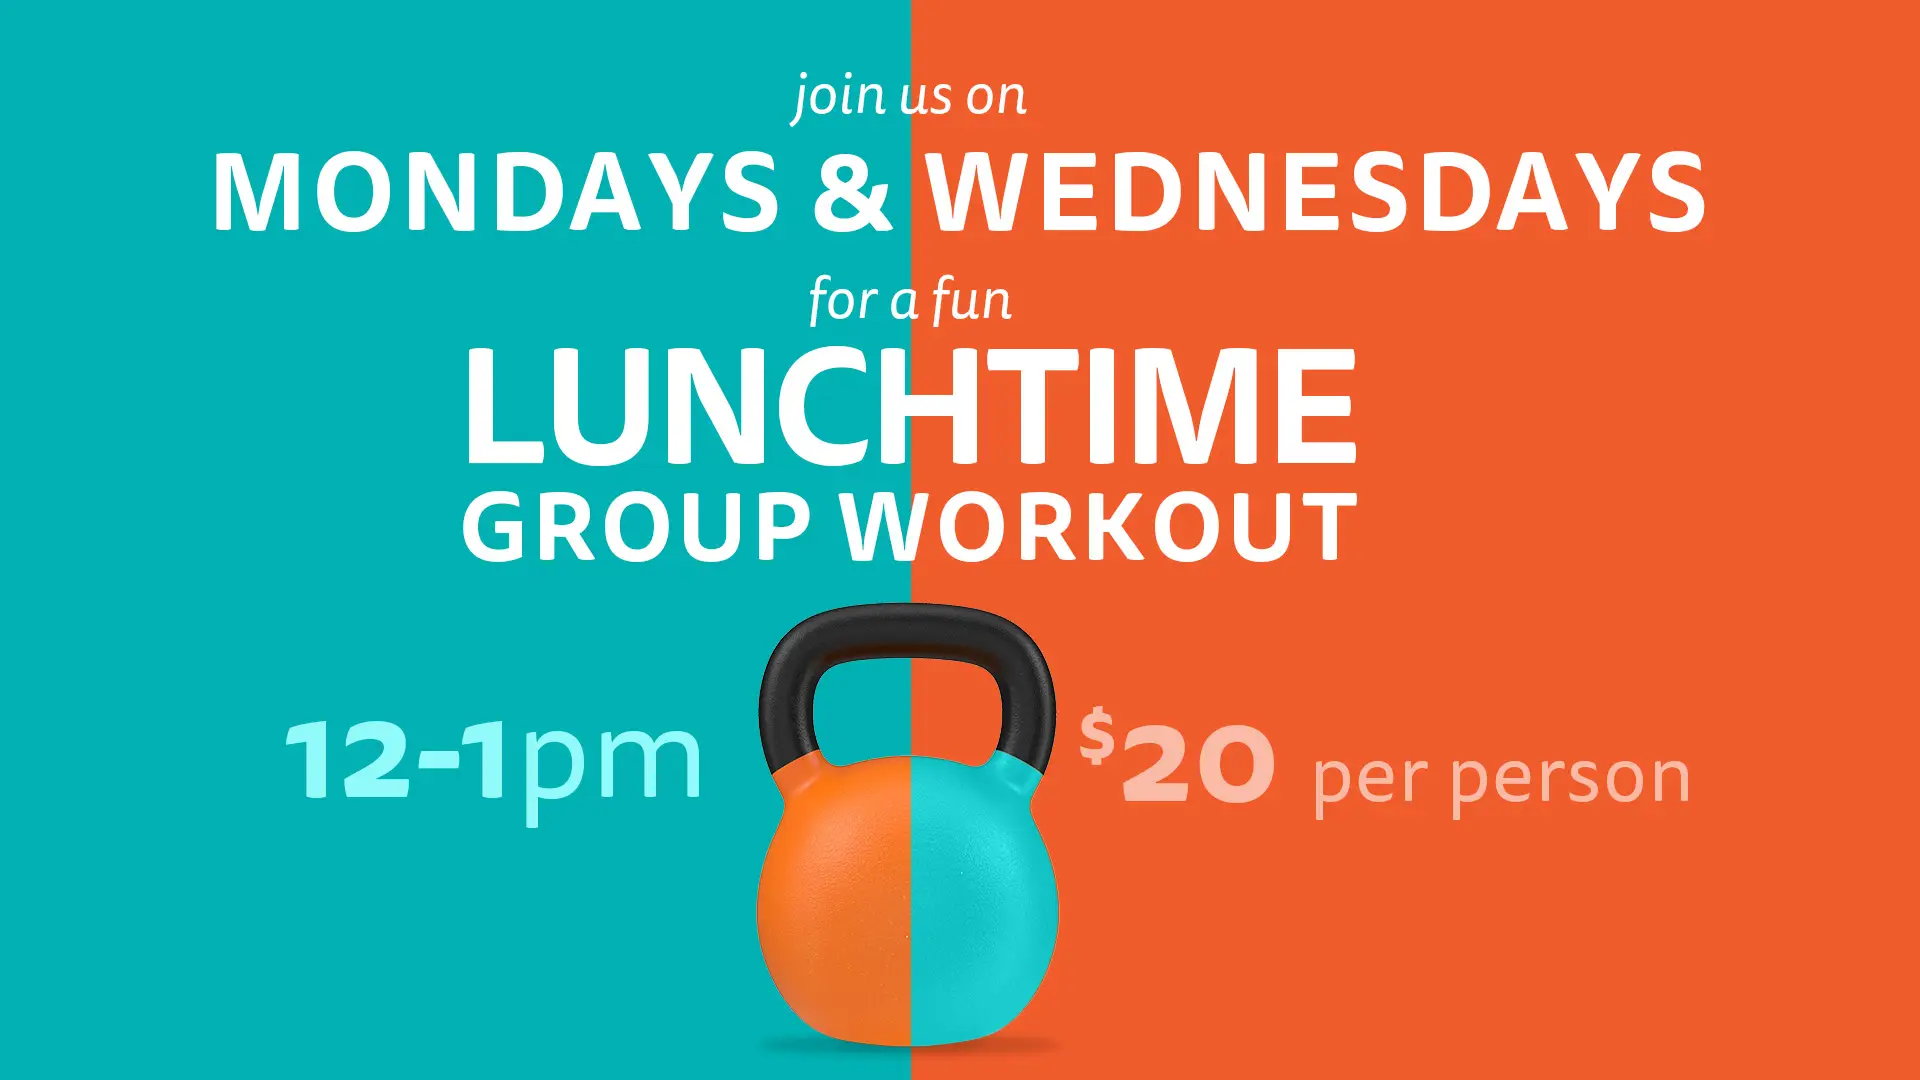 Lunchtime Group Workouts at Thrive Proactive Health